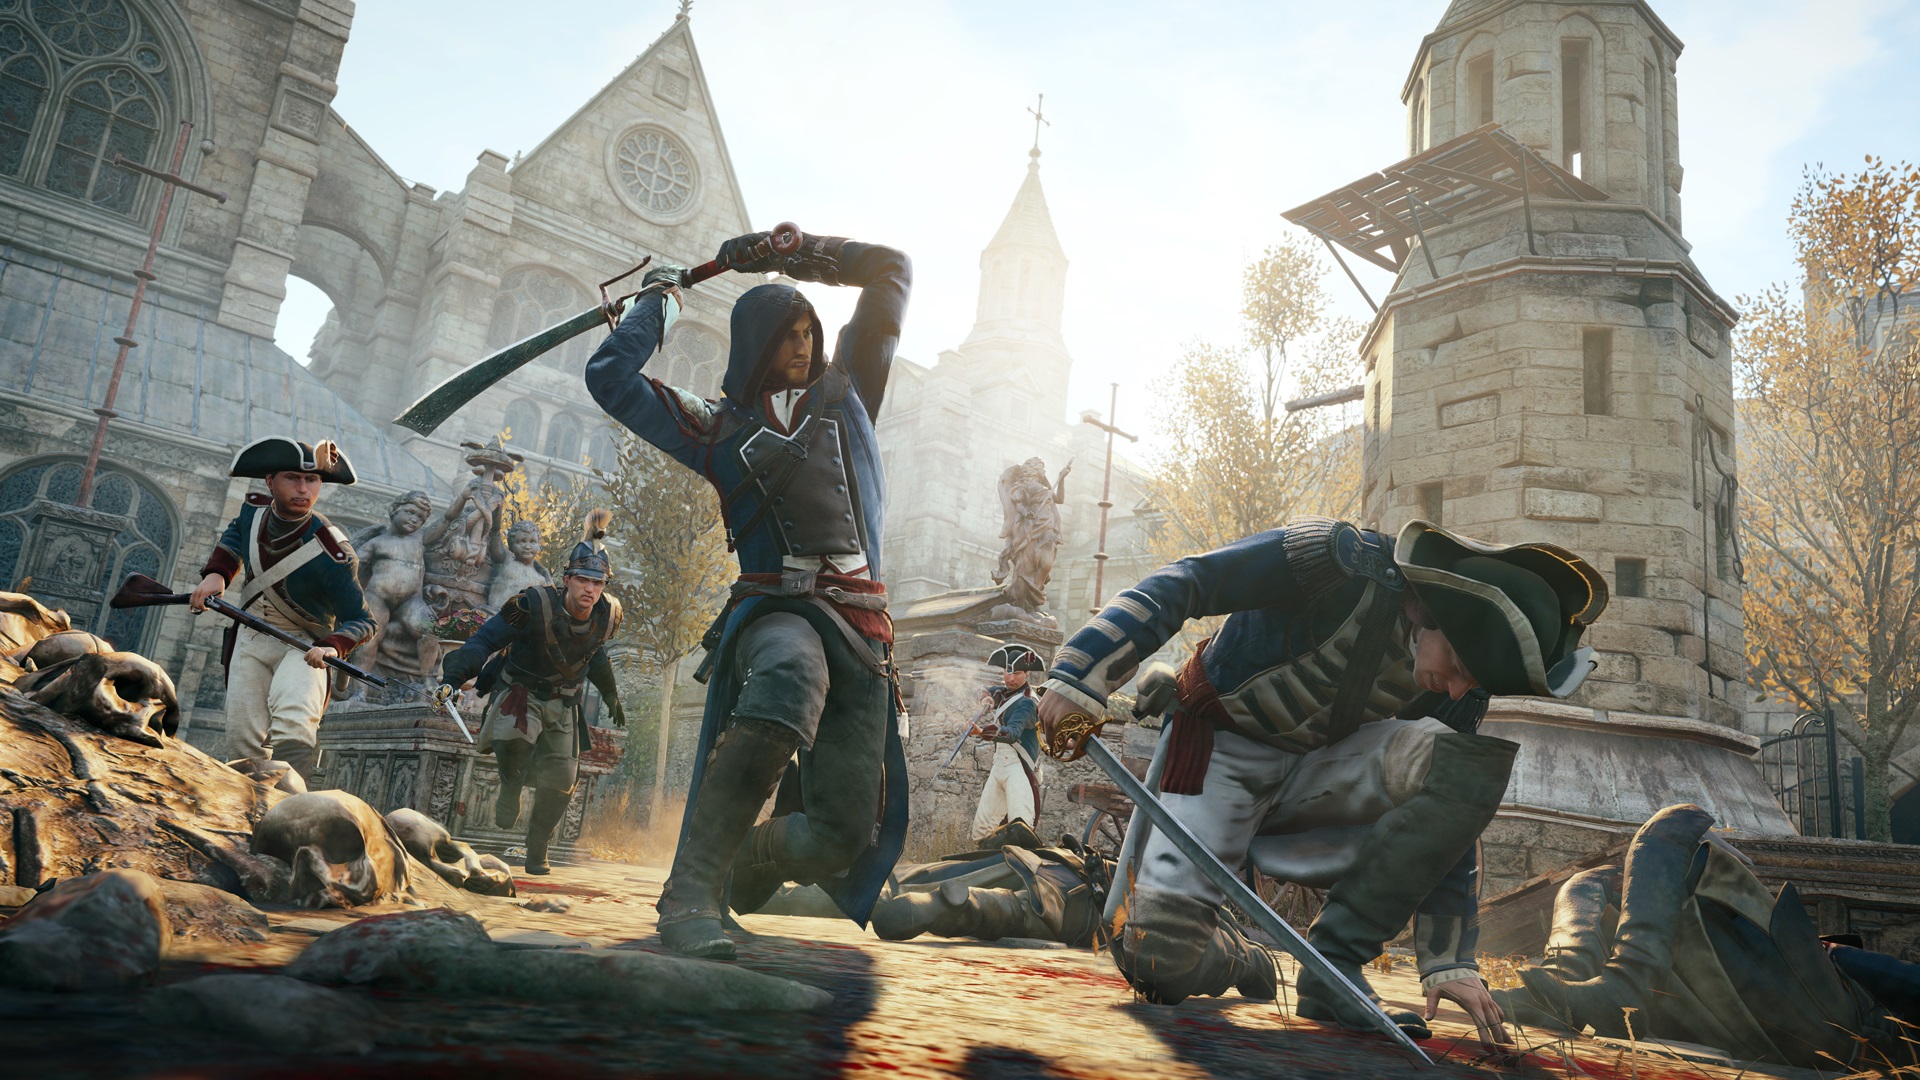 Why Assassin's Creed: Unity Deserves a Second Chance - IGN